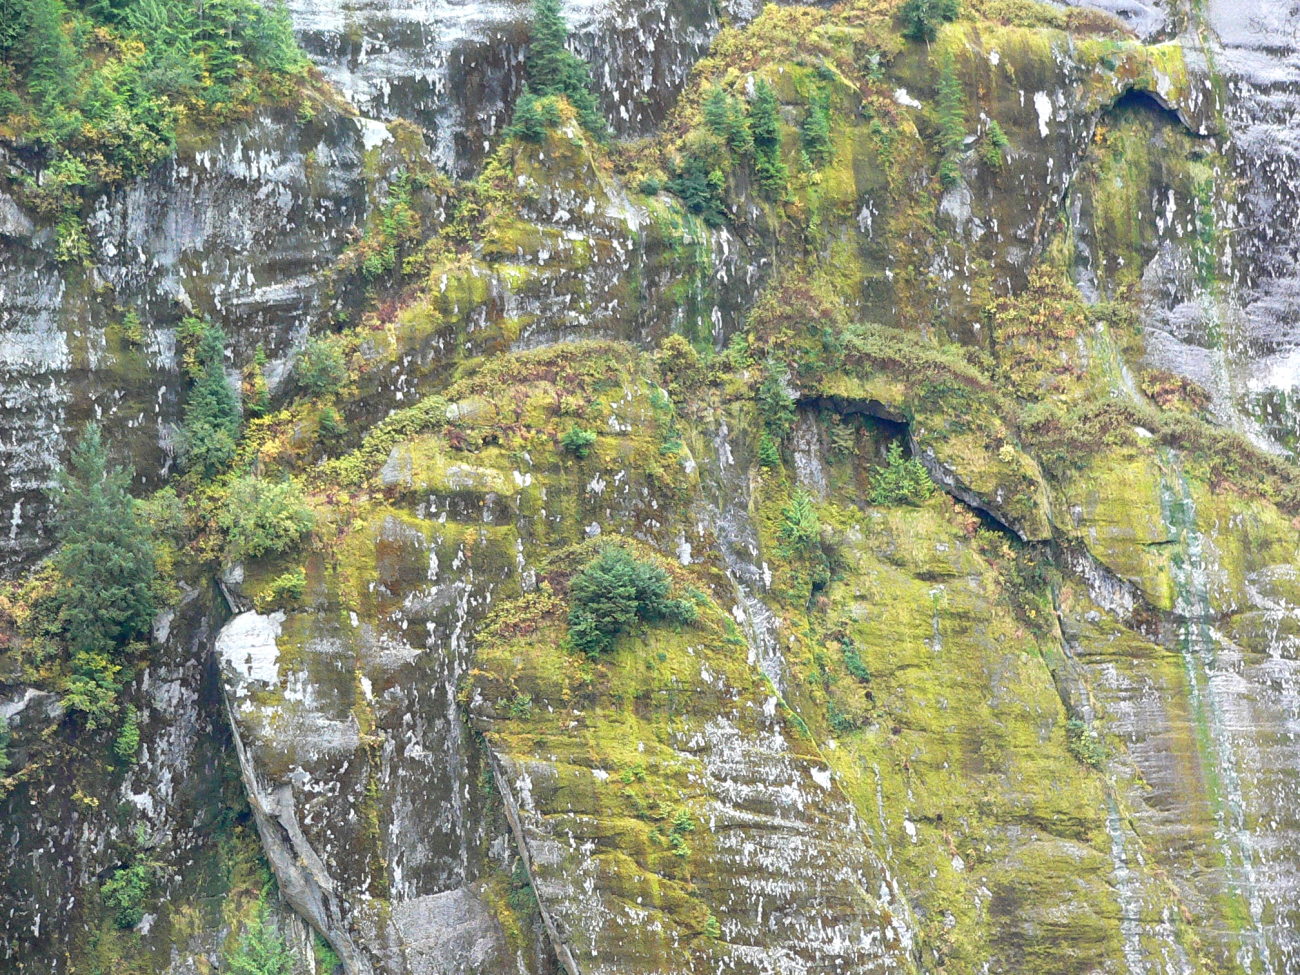 Cliff covered by moss